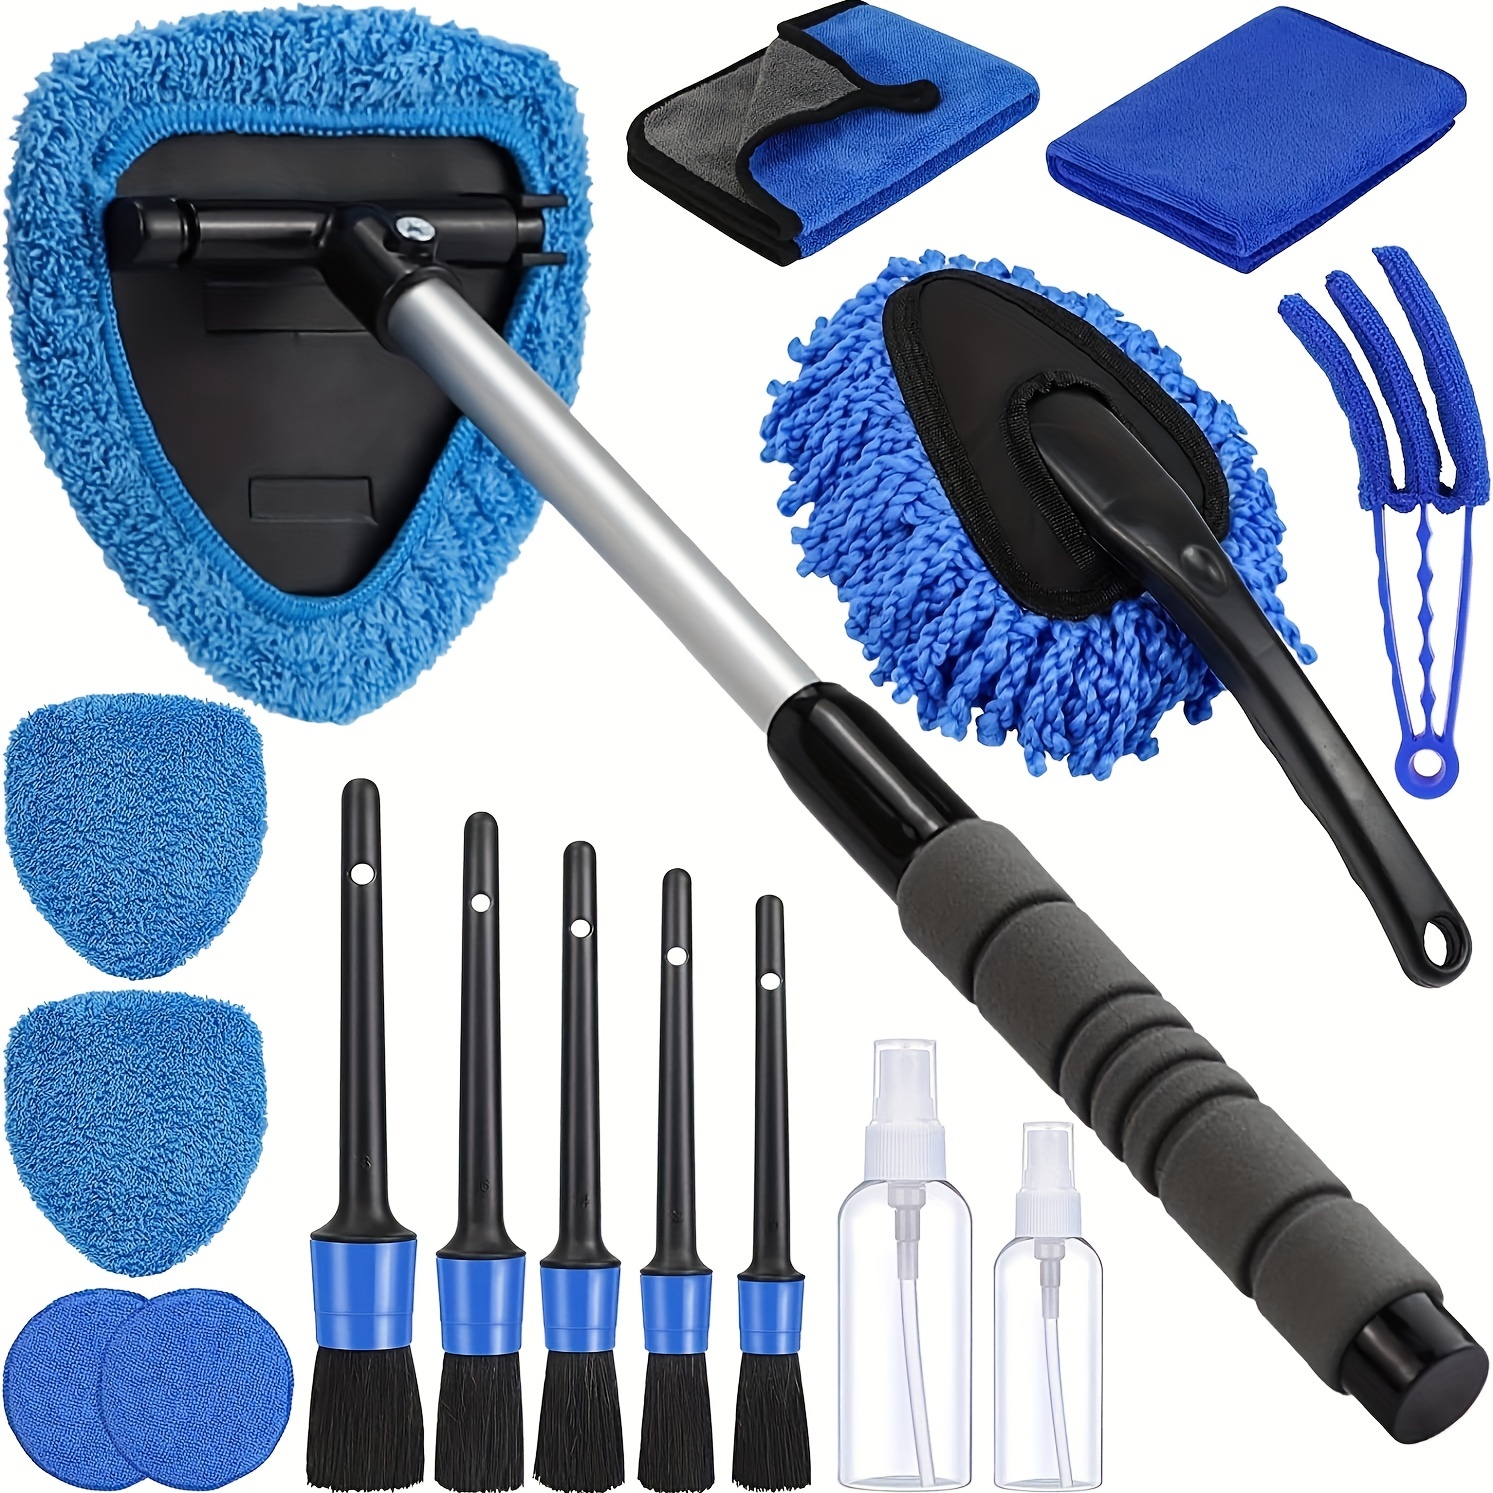 Long Handle Car Window Cleaner Brush Kit Windshield Cleaning Wash Tool  Inside Interior Auto Glass Wiper Car Cleaning Accessories - Cleaning  Brushes - AliExpress